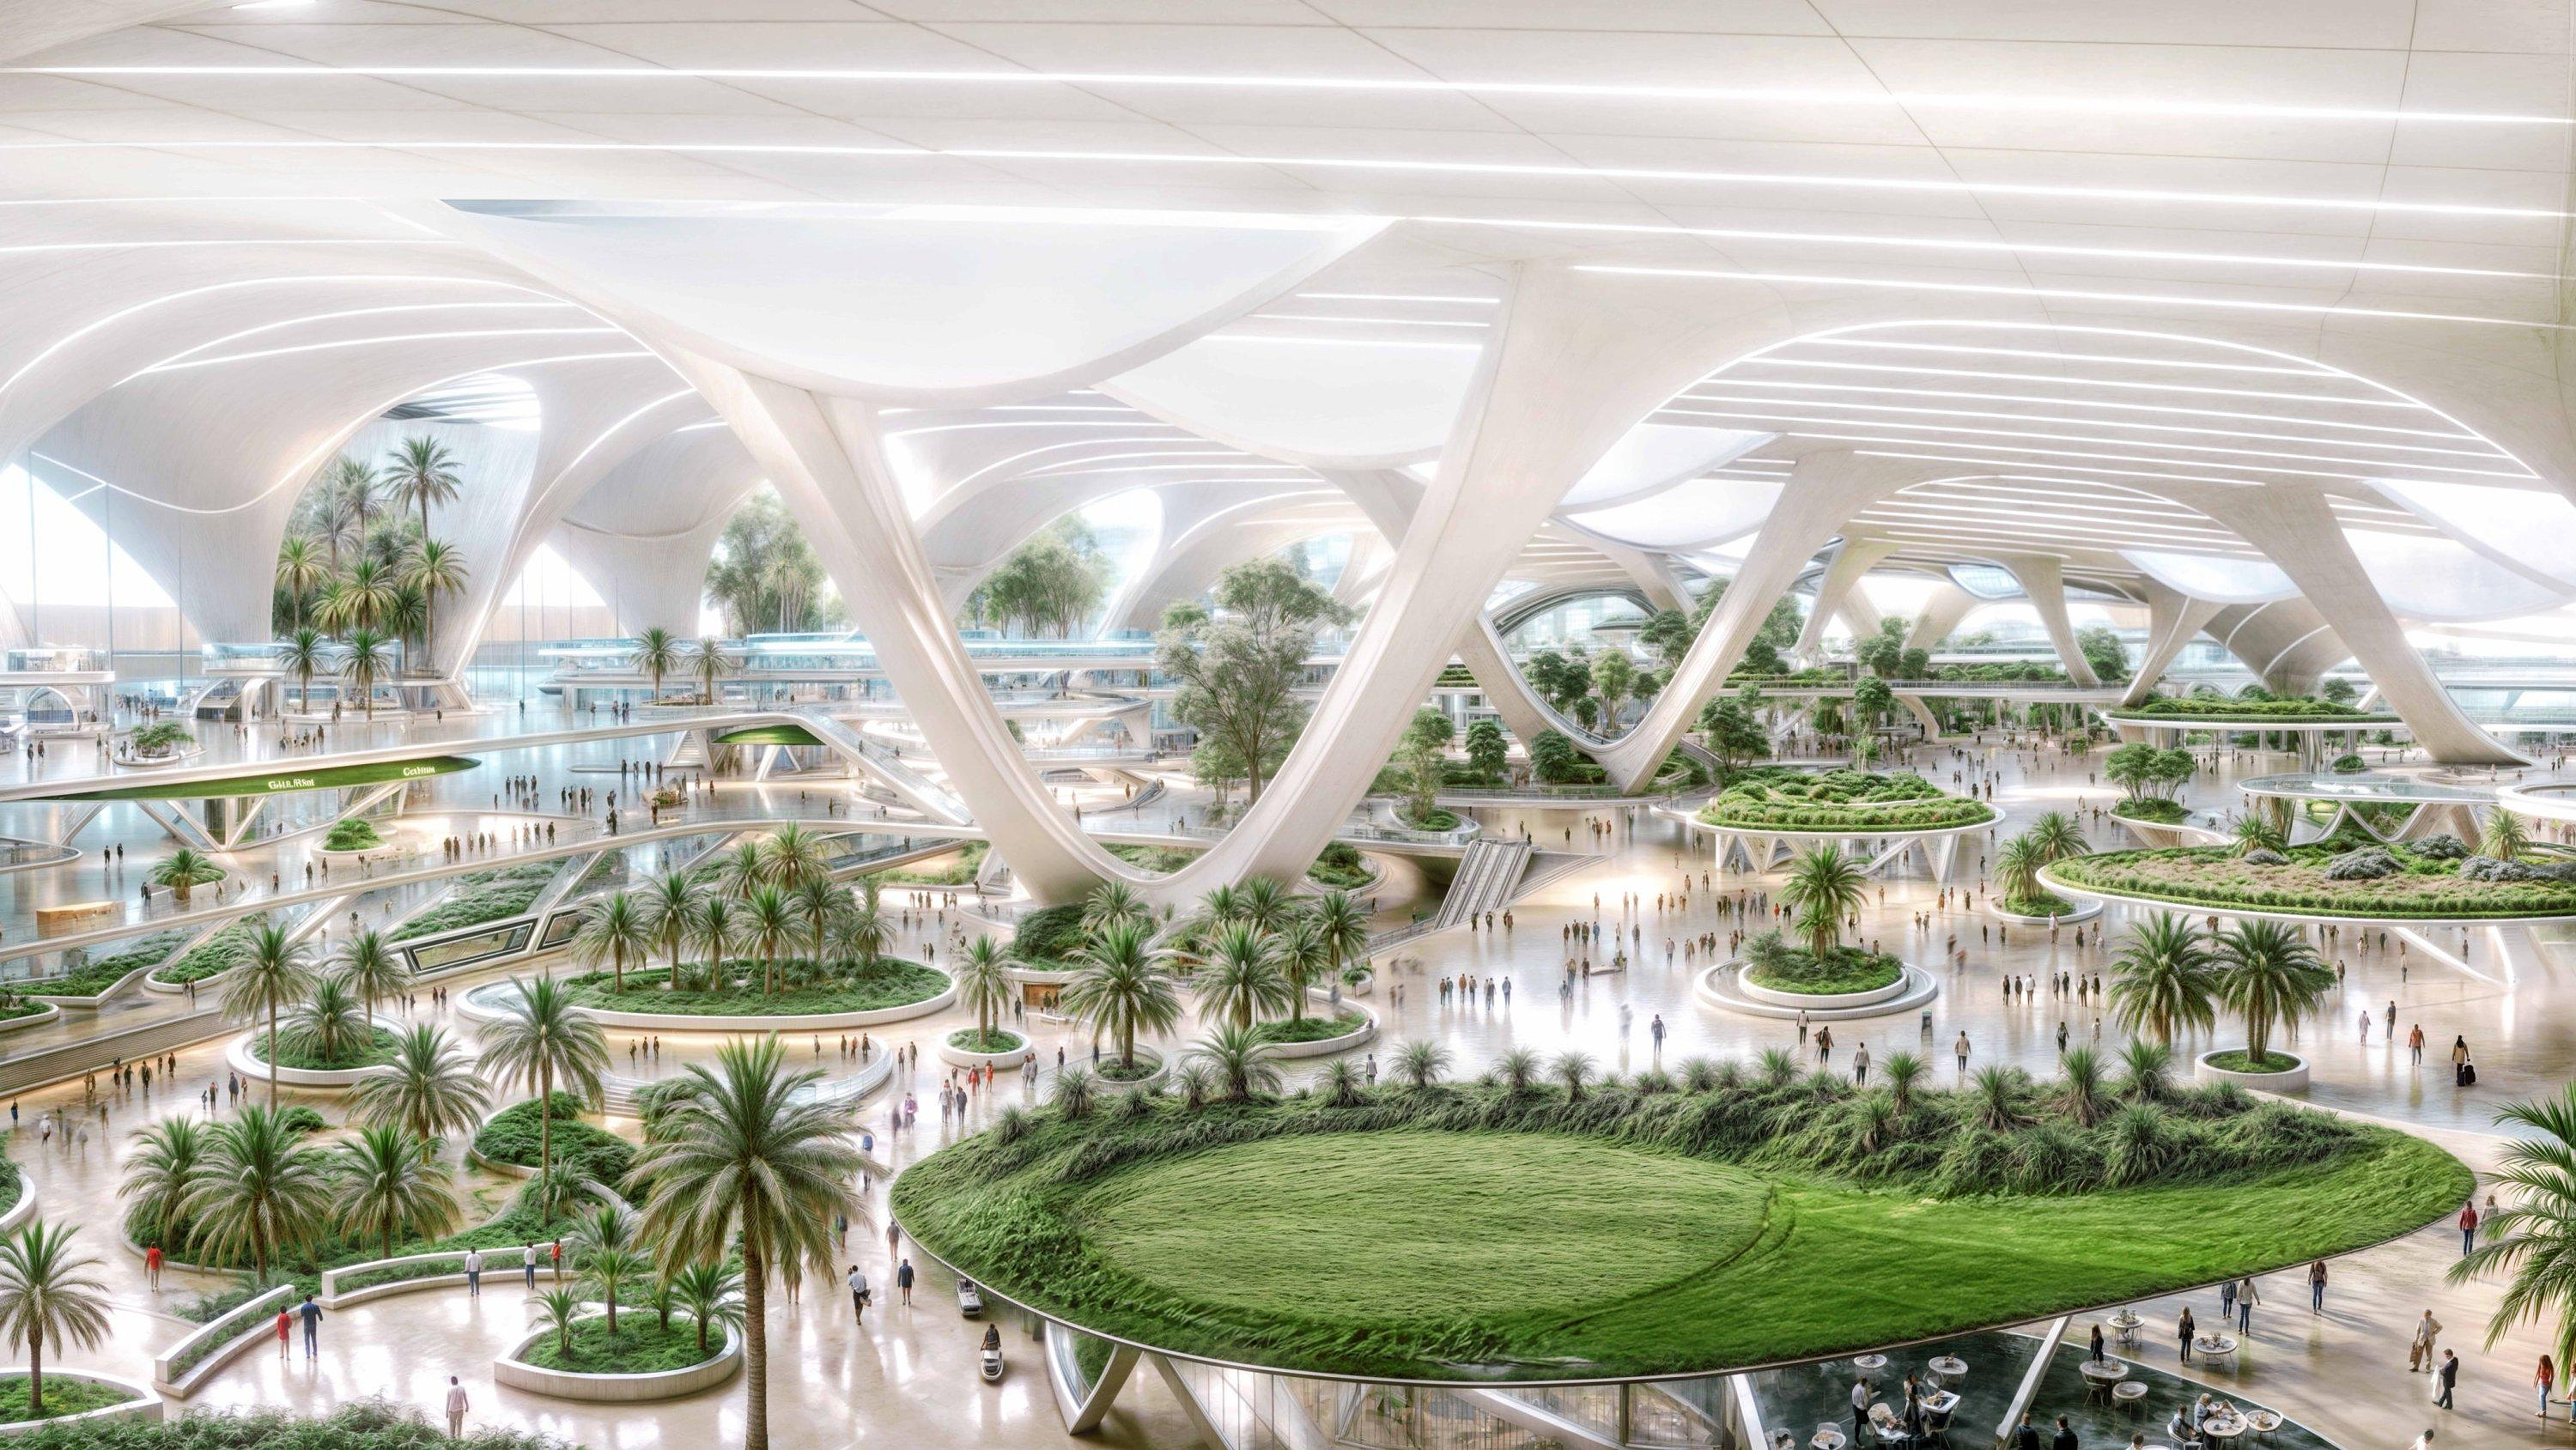 Dubai begins the transformation of Al-Maktoum to make it the future “largest airport in the world”